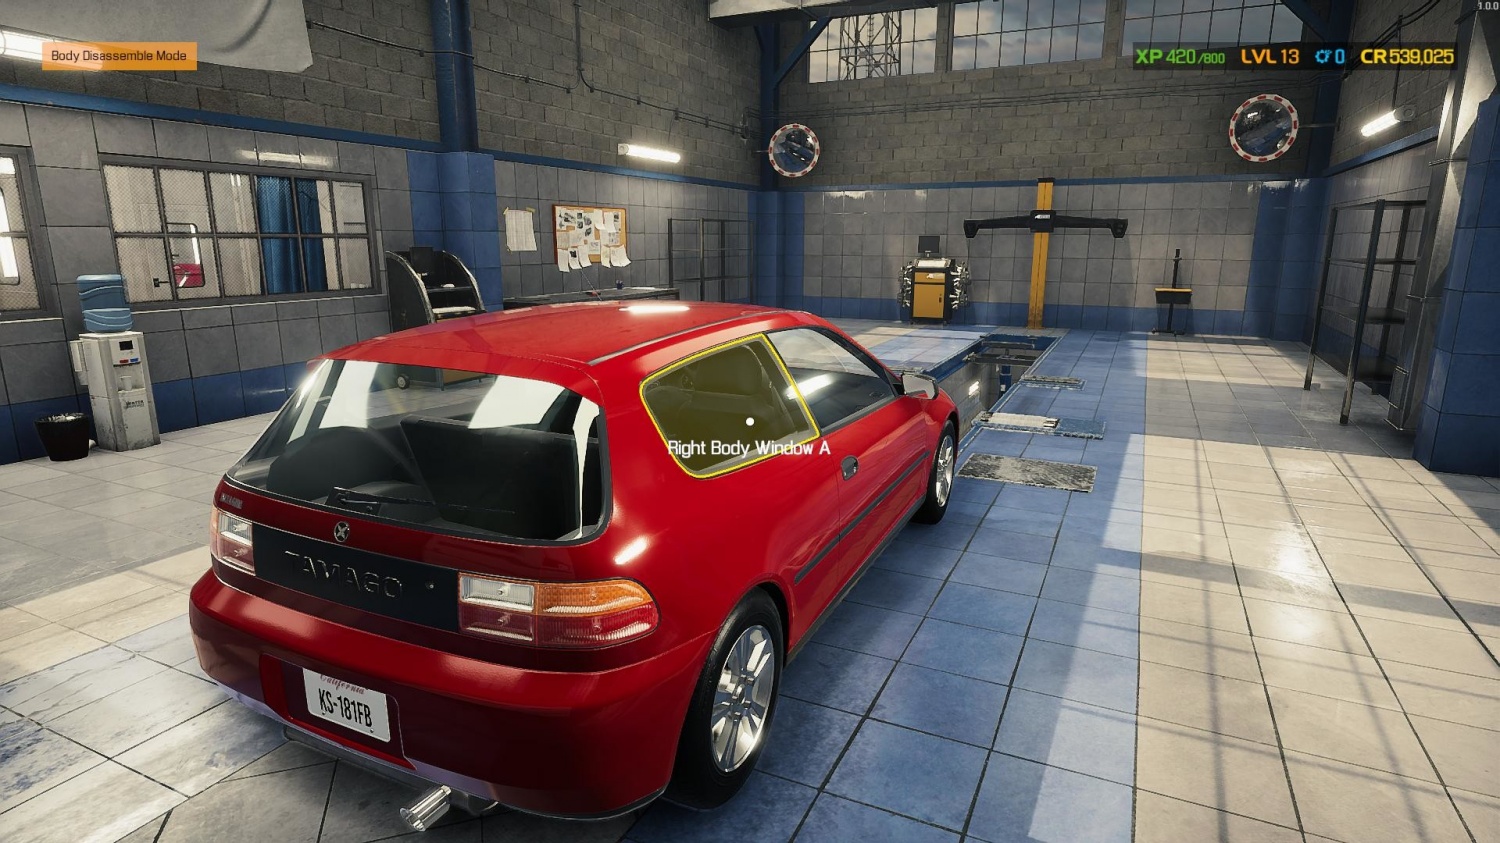 Car Mechanic Simulator 2021 Car Mods guide: How to Change the Names of